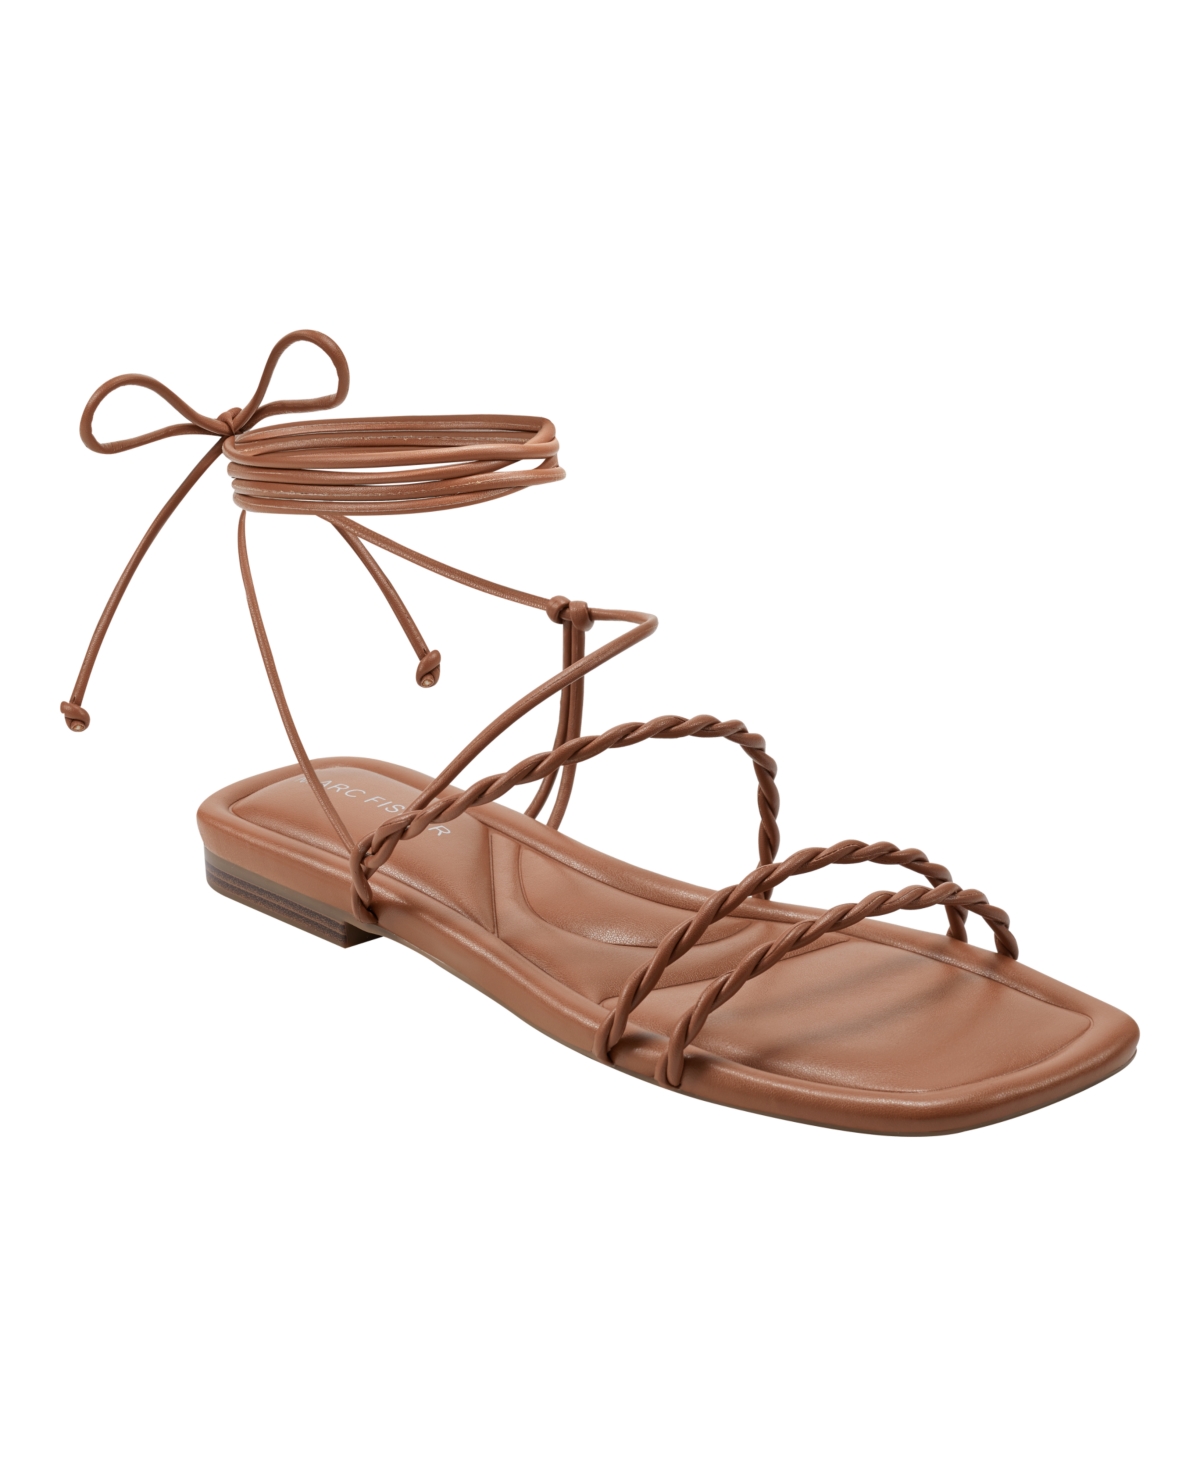 MARC FISHER WOMEN'S LAKITA STRAPPY CASUAL FLATS SANDALS